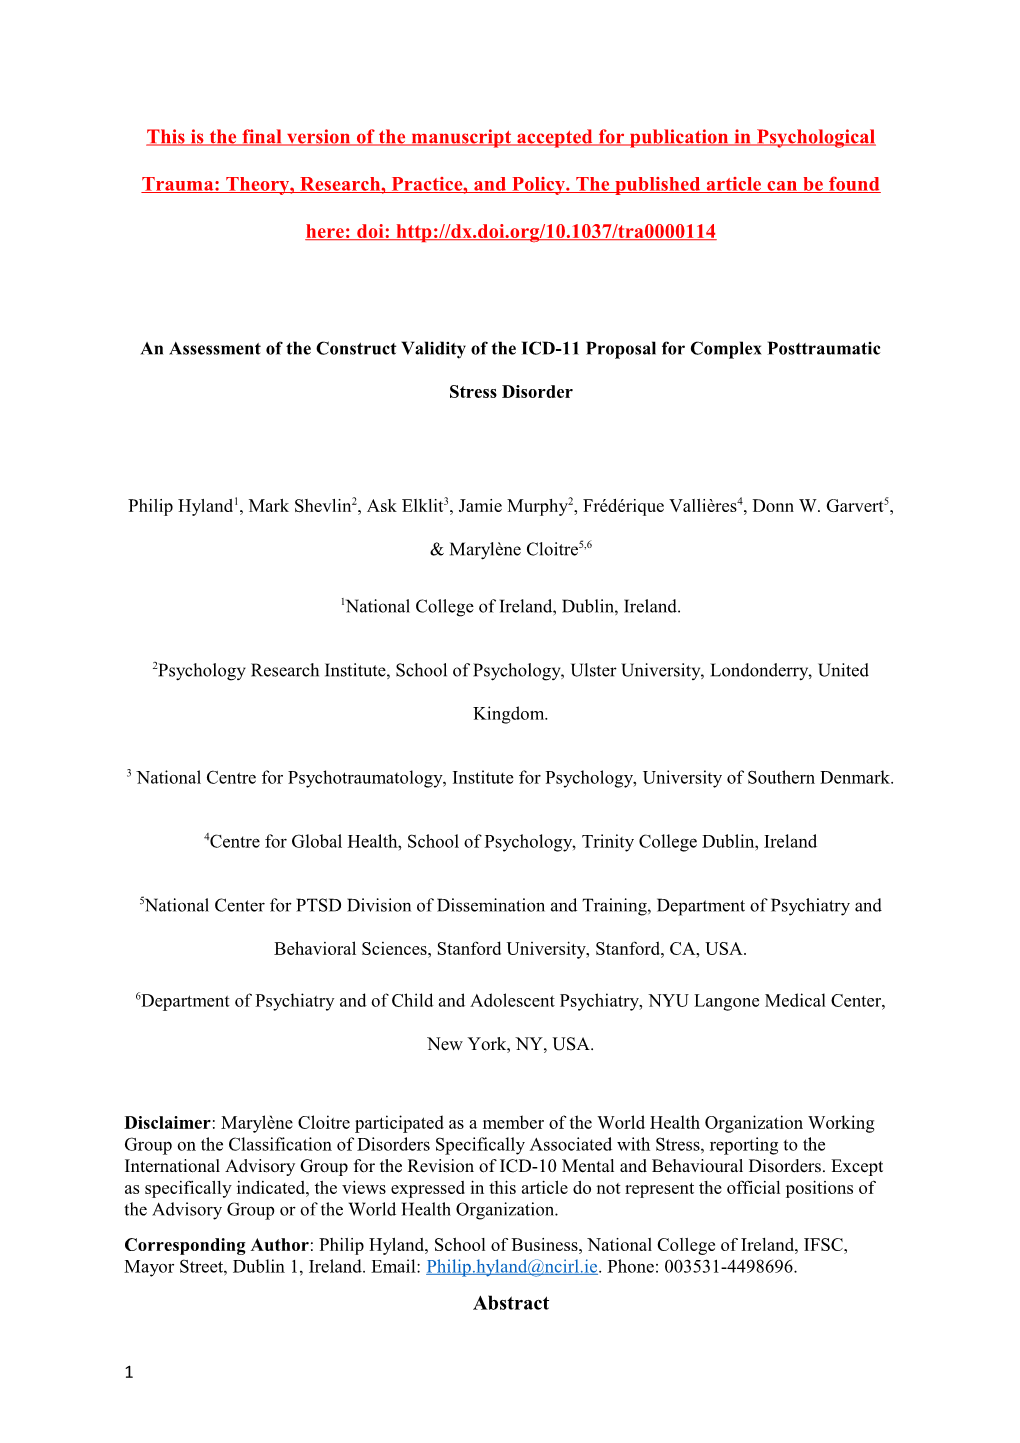 This Is the Final Version of the Manuscript Accepted for Publication in Psychological